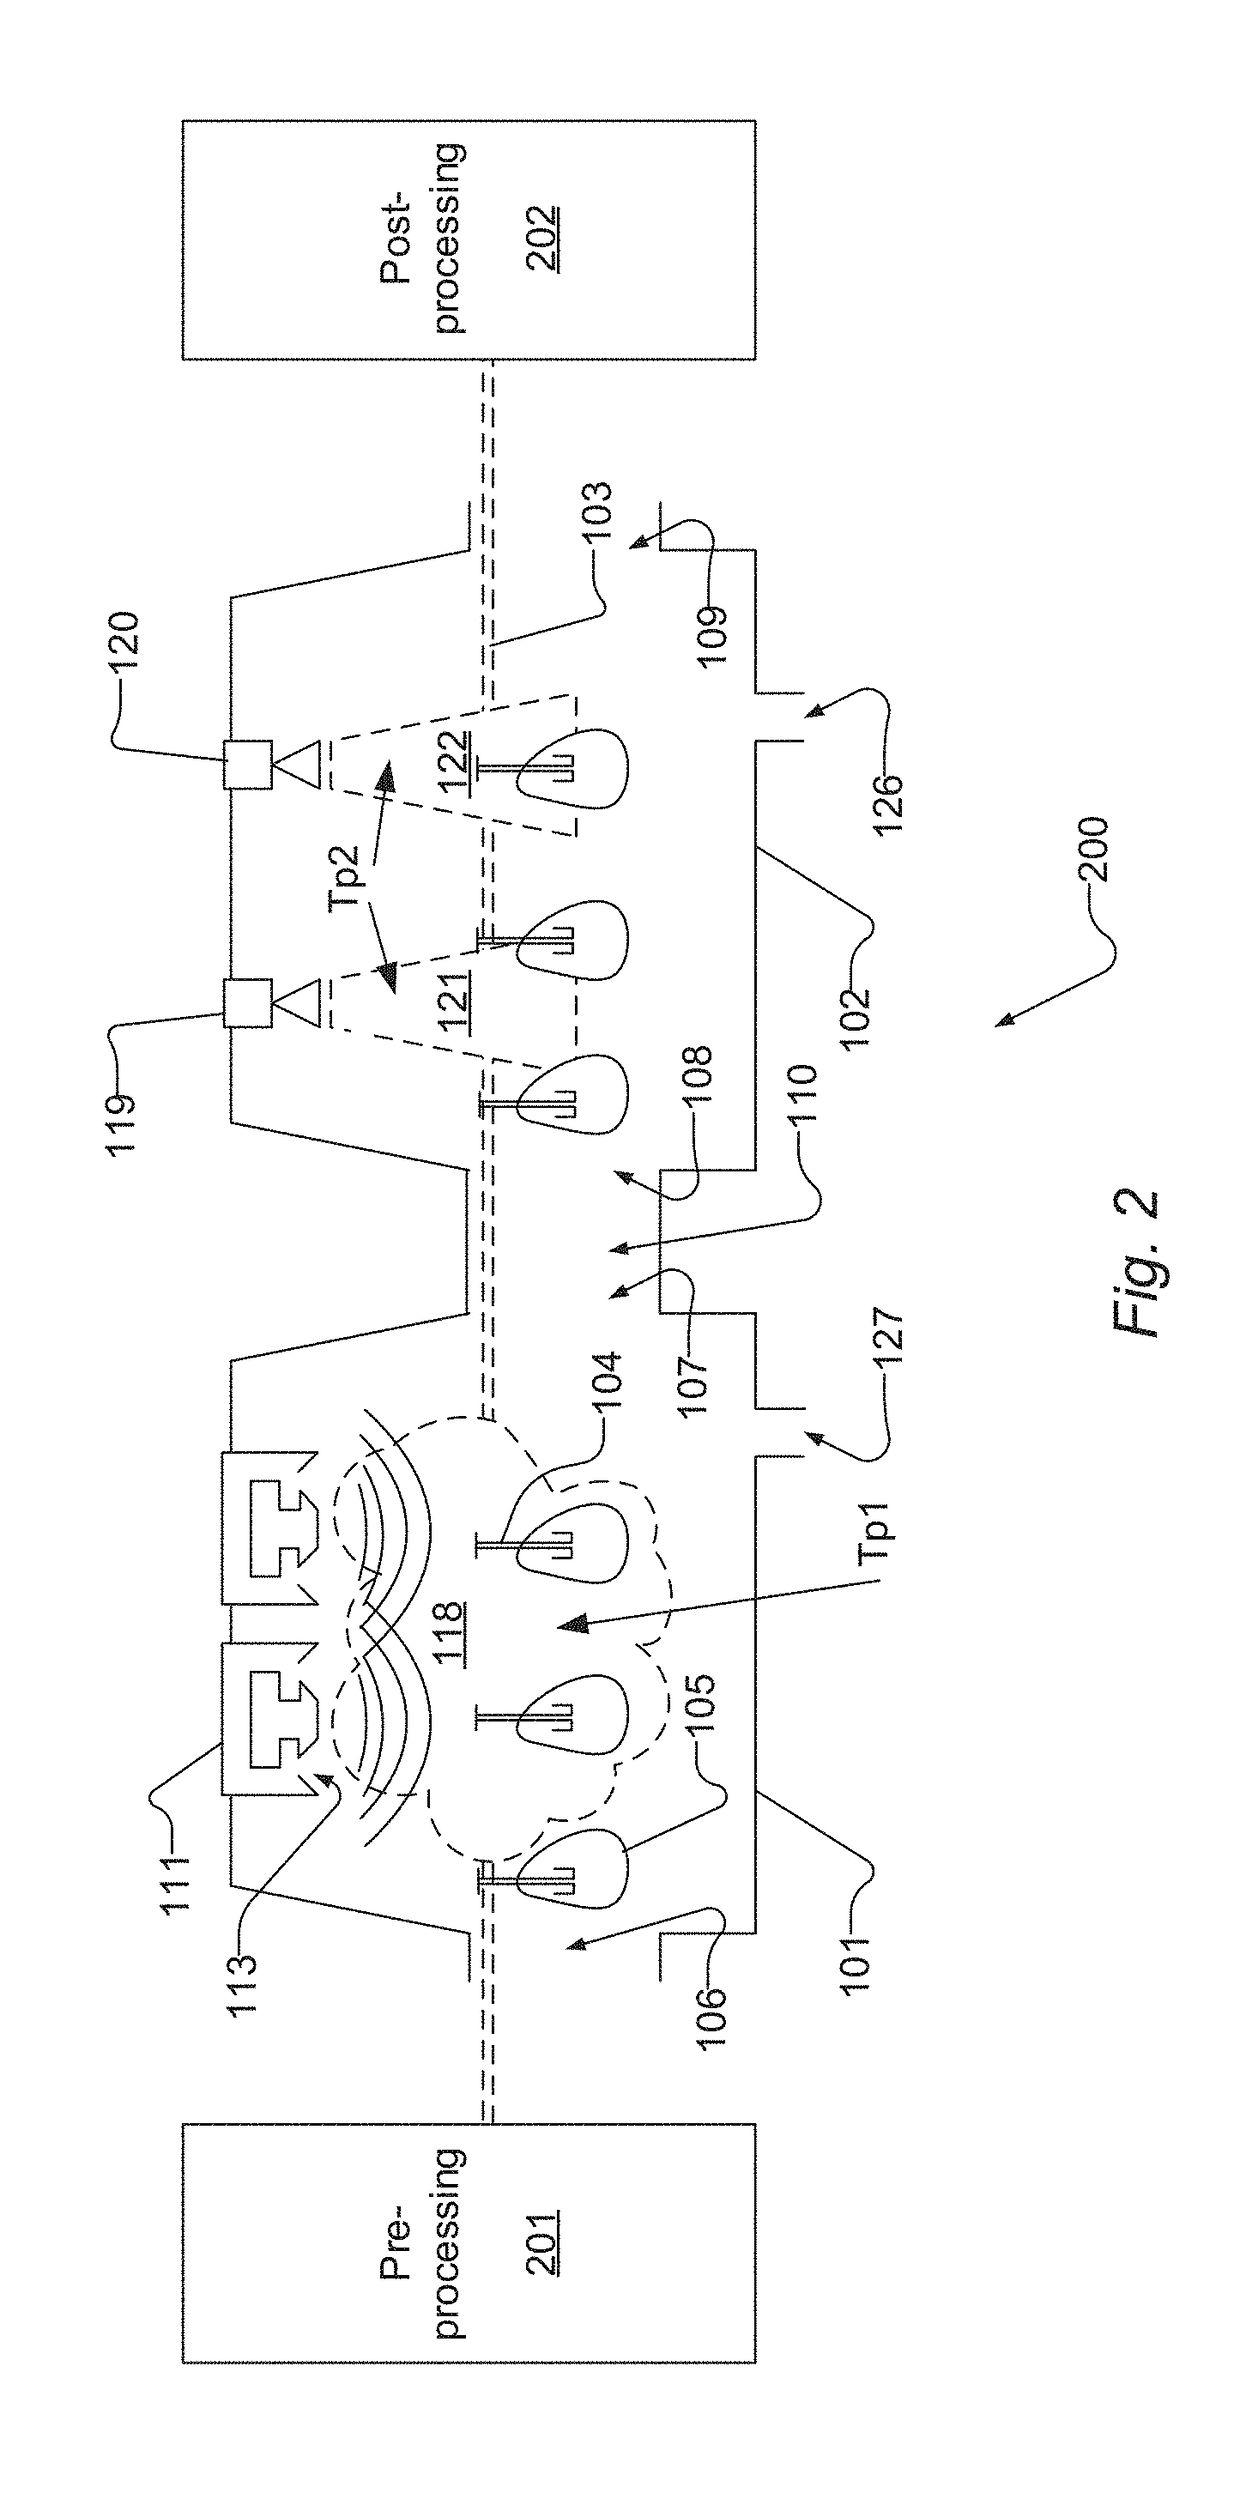 Production line and method for processing food products